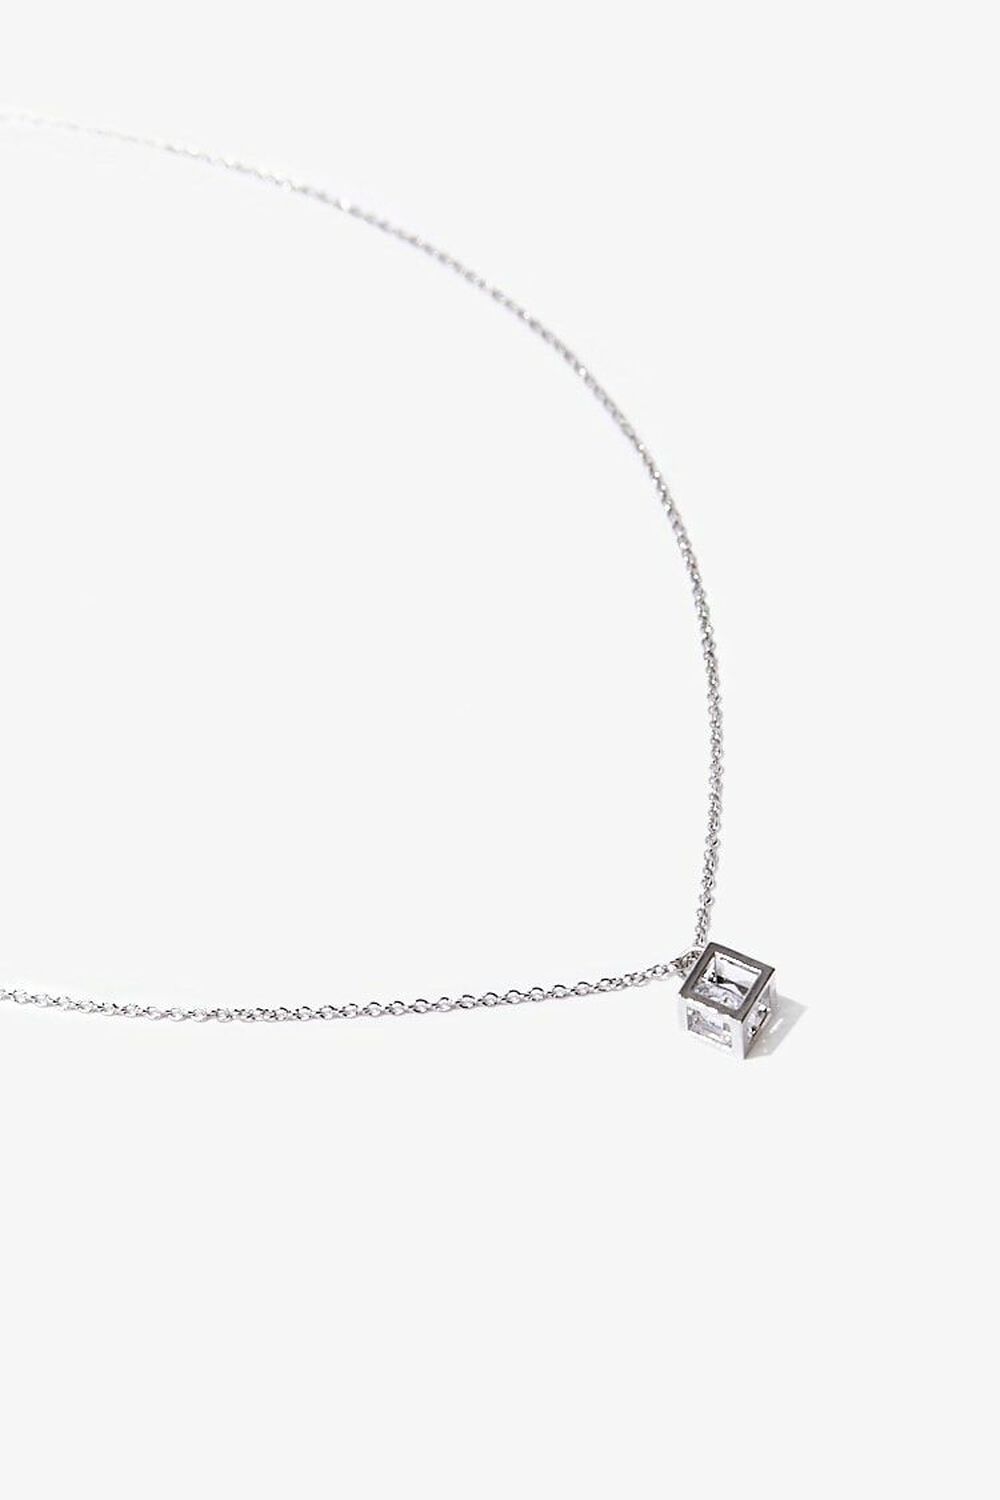 SILVER/CLEAR Cube Charm Necklace, image 1